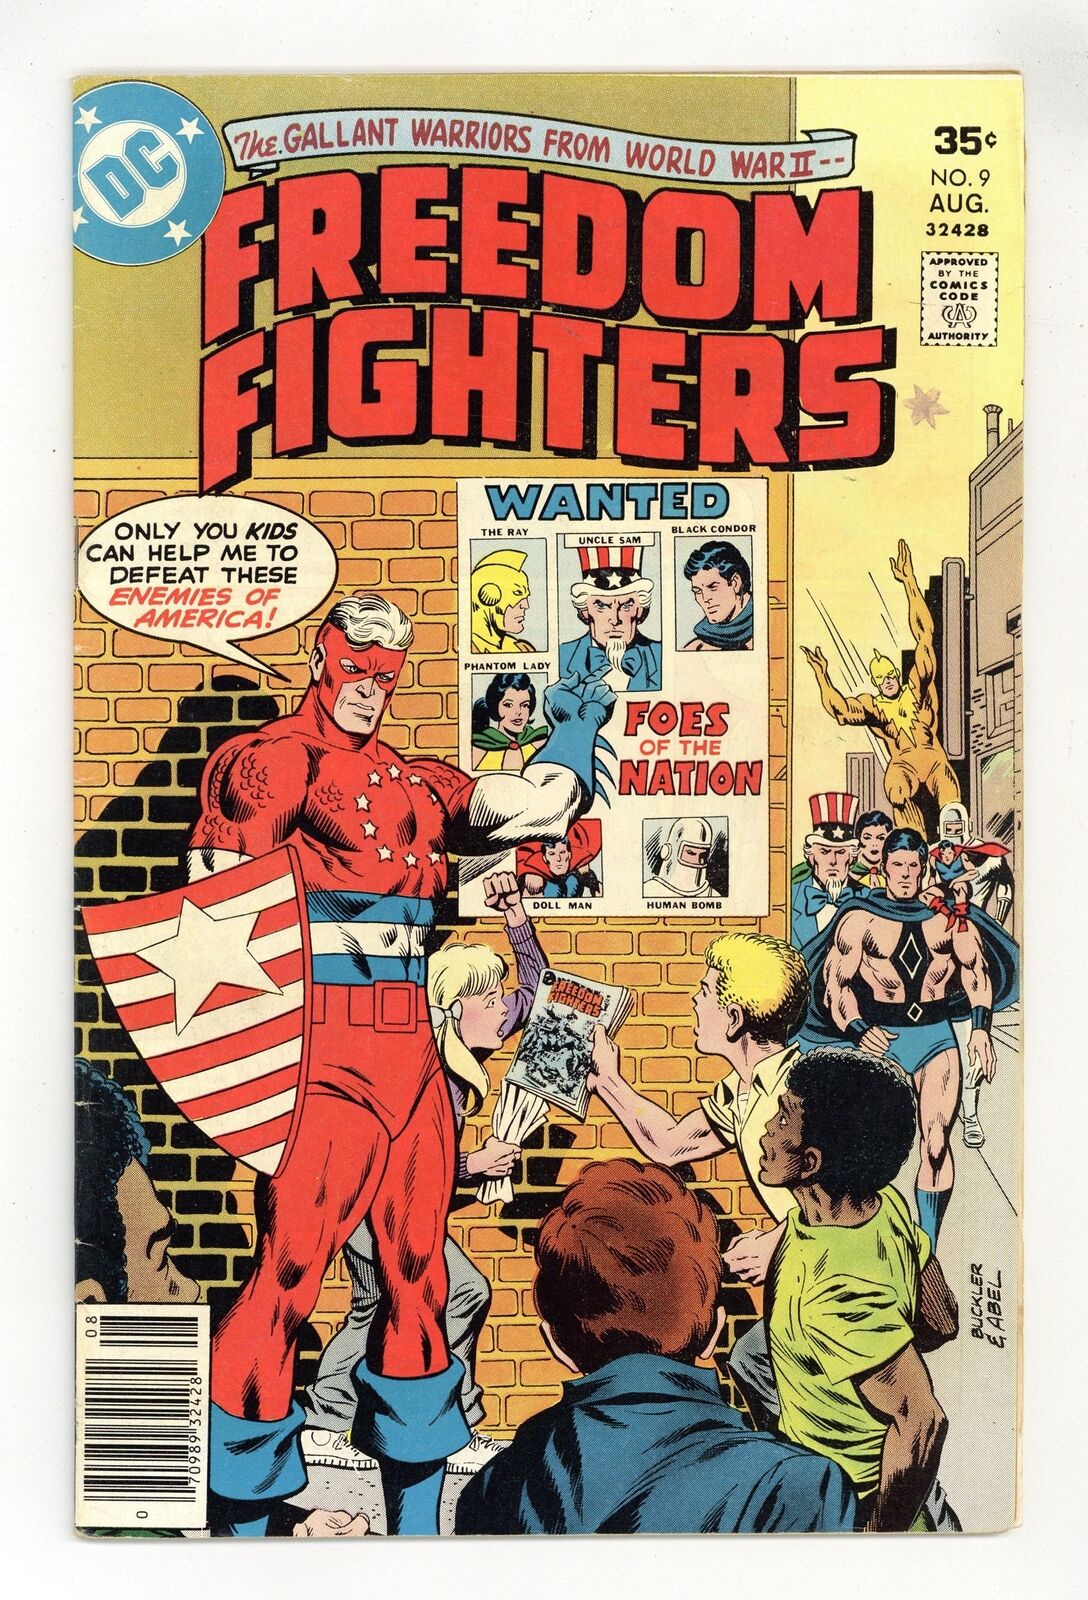 Freedom Fighters Mark Jewelers #9MJ VG/FN 5.0 1977 Low Grade